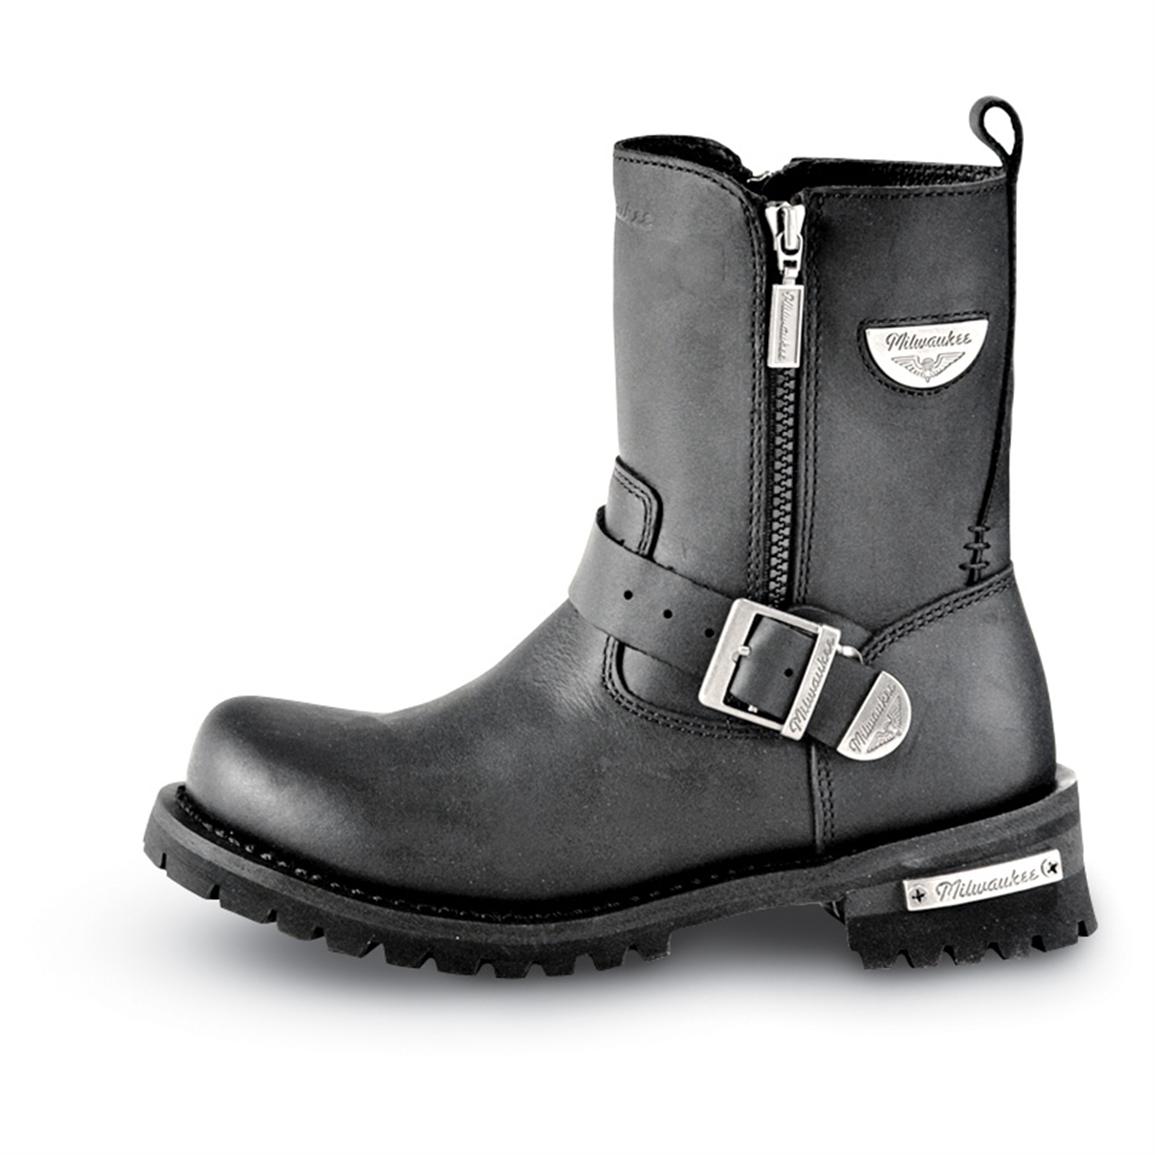 Awesome Photos Of milwaukee motorcycle boots PNG - Nighthawk motorcycle